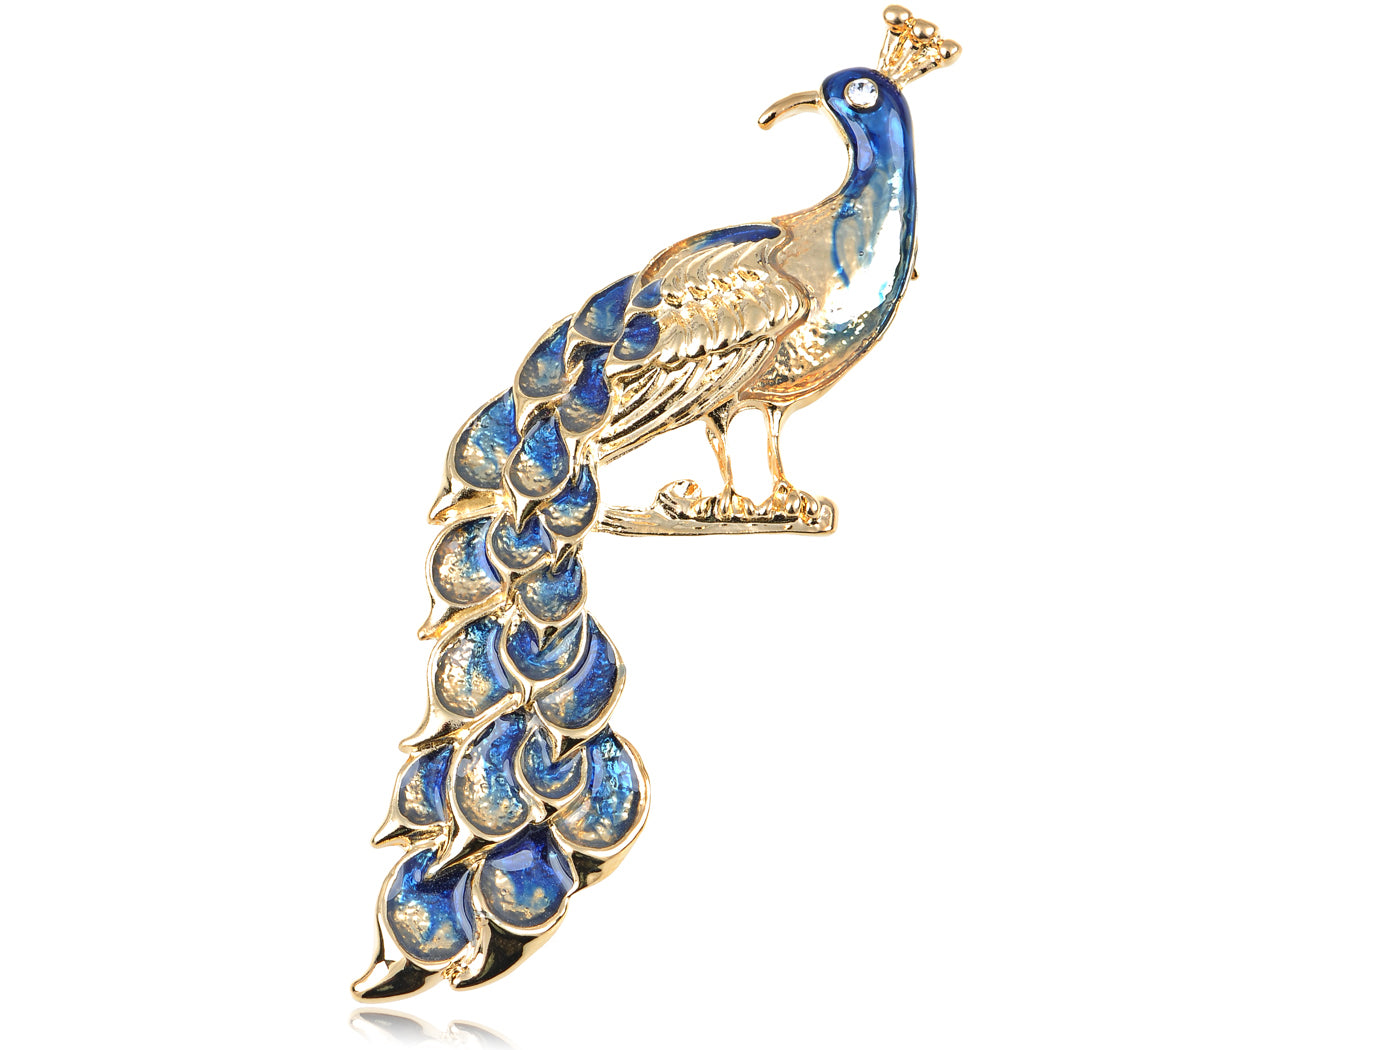 Pearlescent Dark Blue Peacock Tail Feathers Brooch Pin